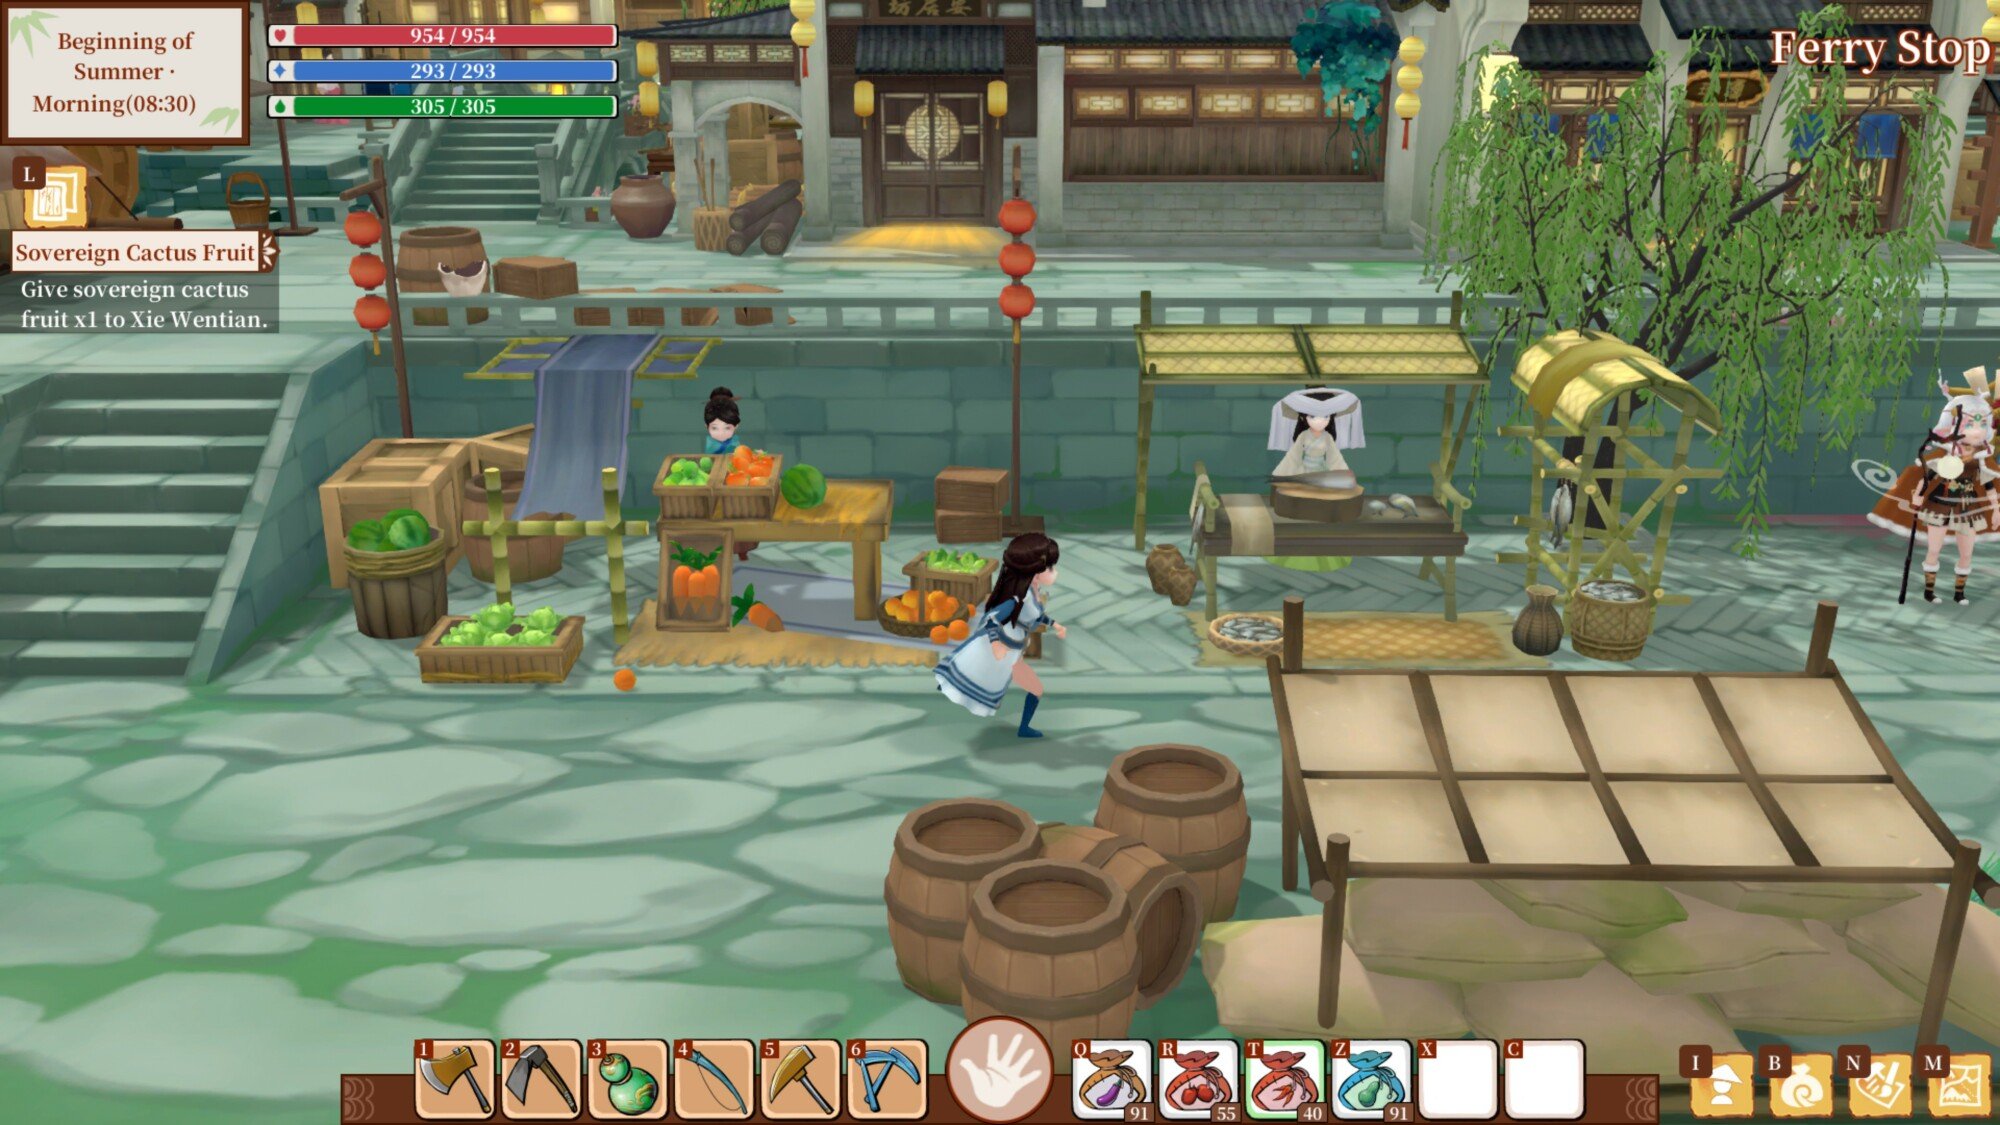 The player character in 'Immortal Life' running through town, past stallholders.